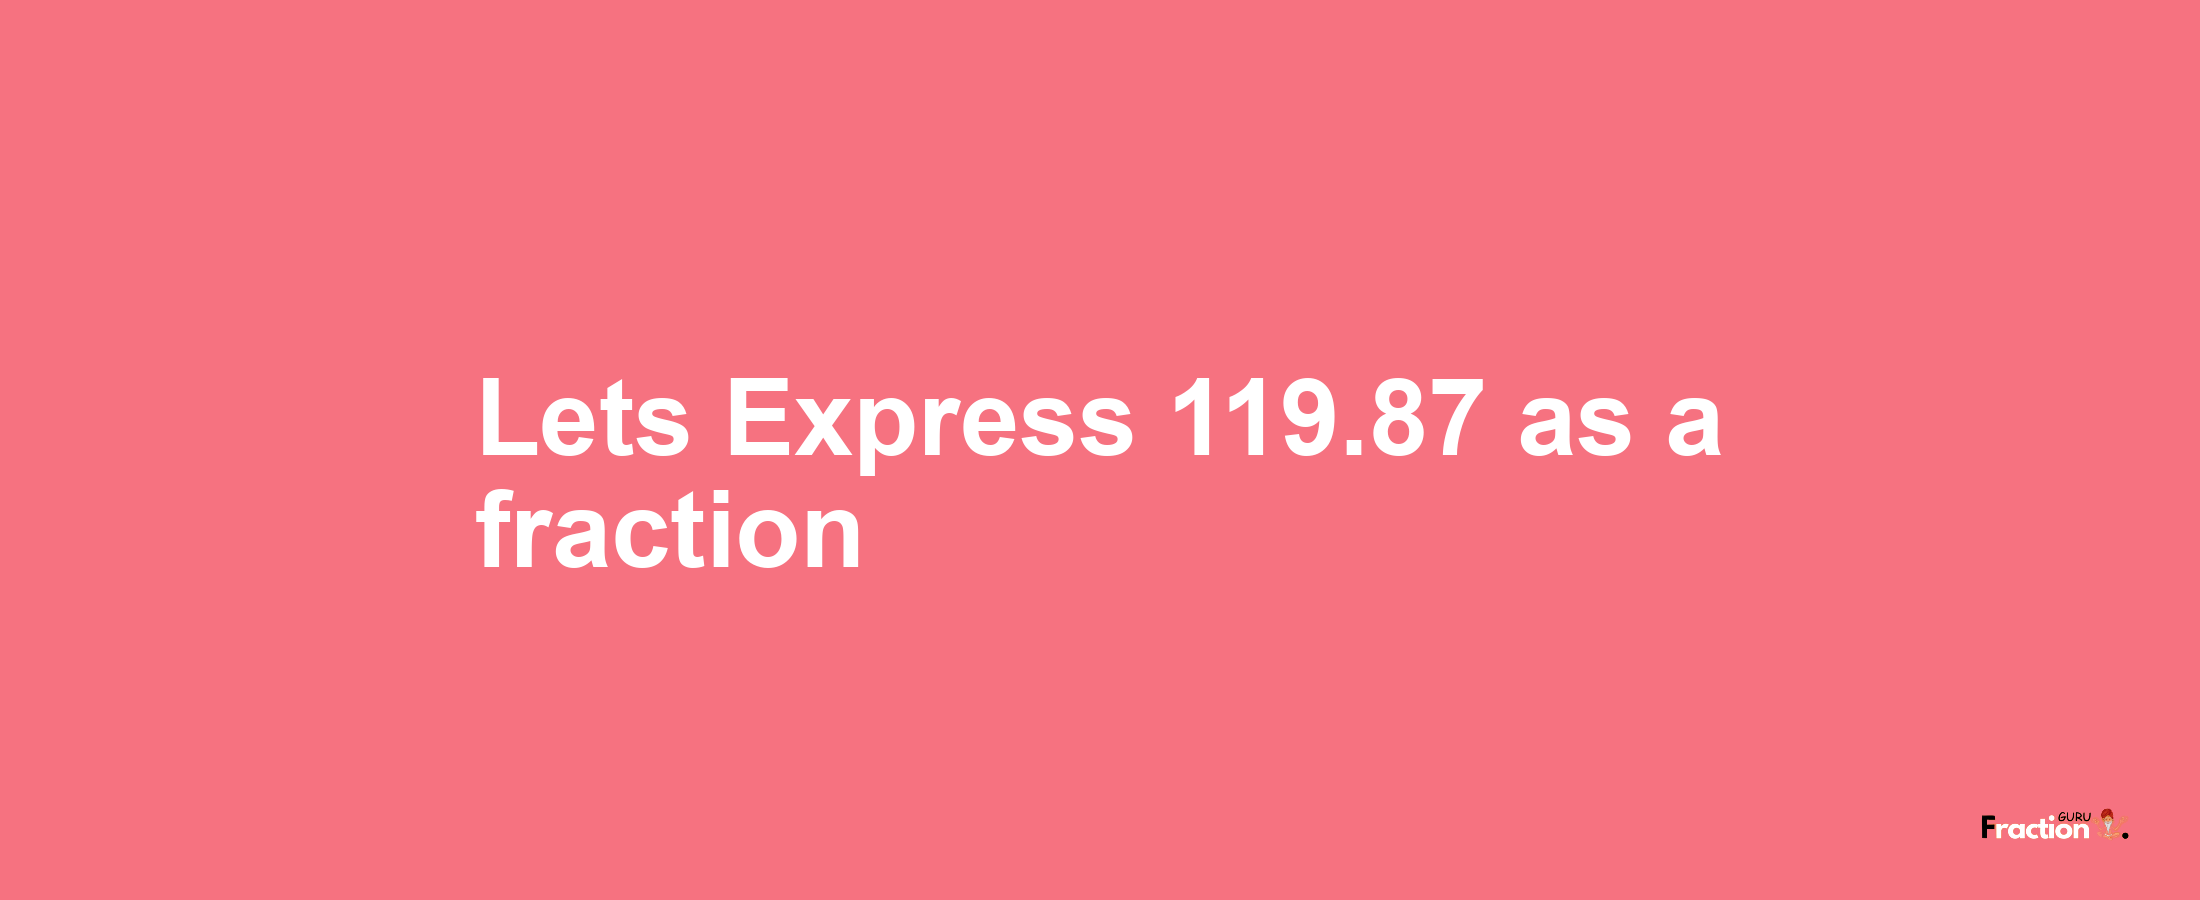 Lets Express 119.87 as afraction